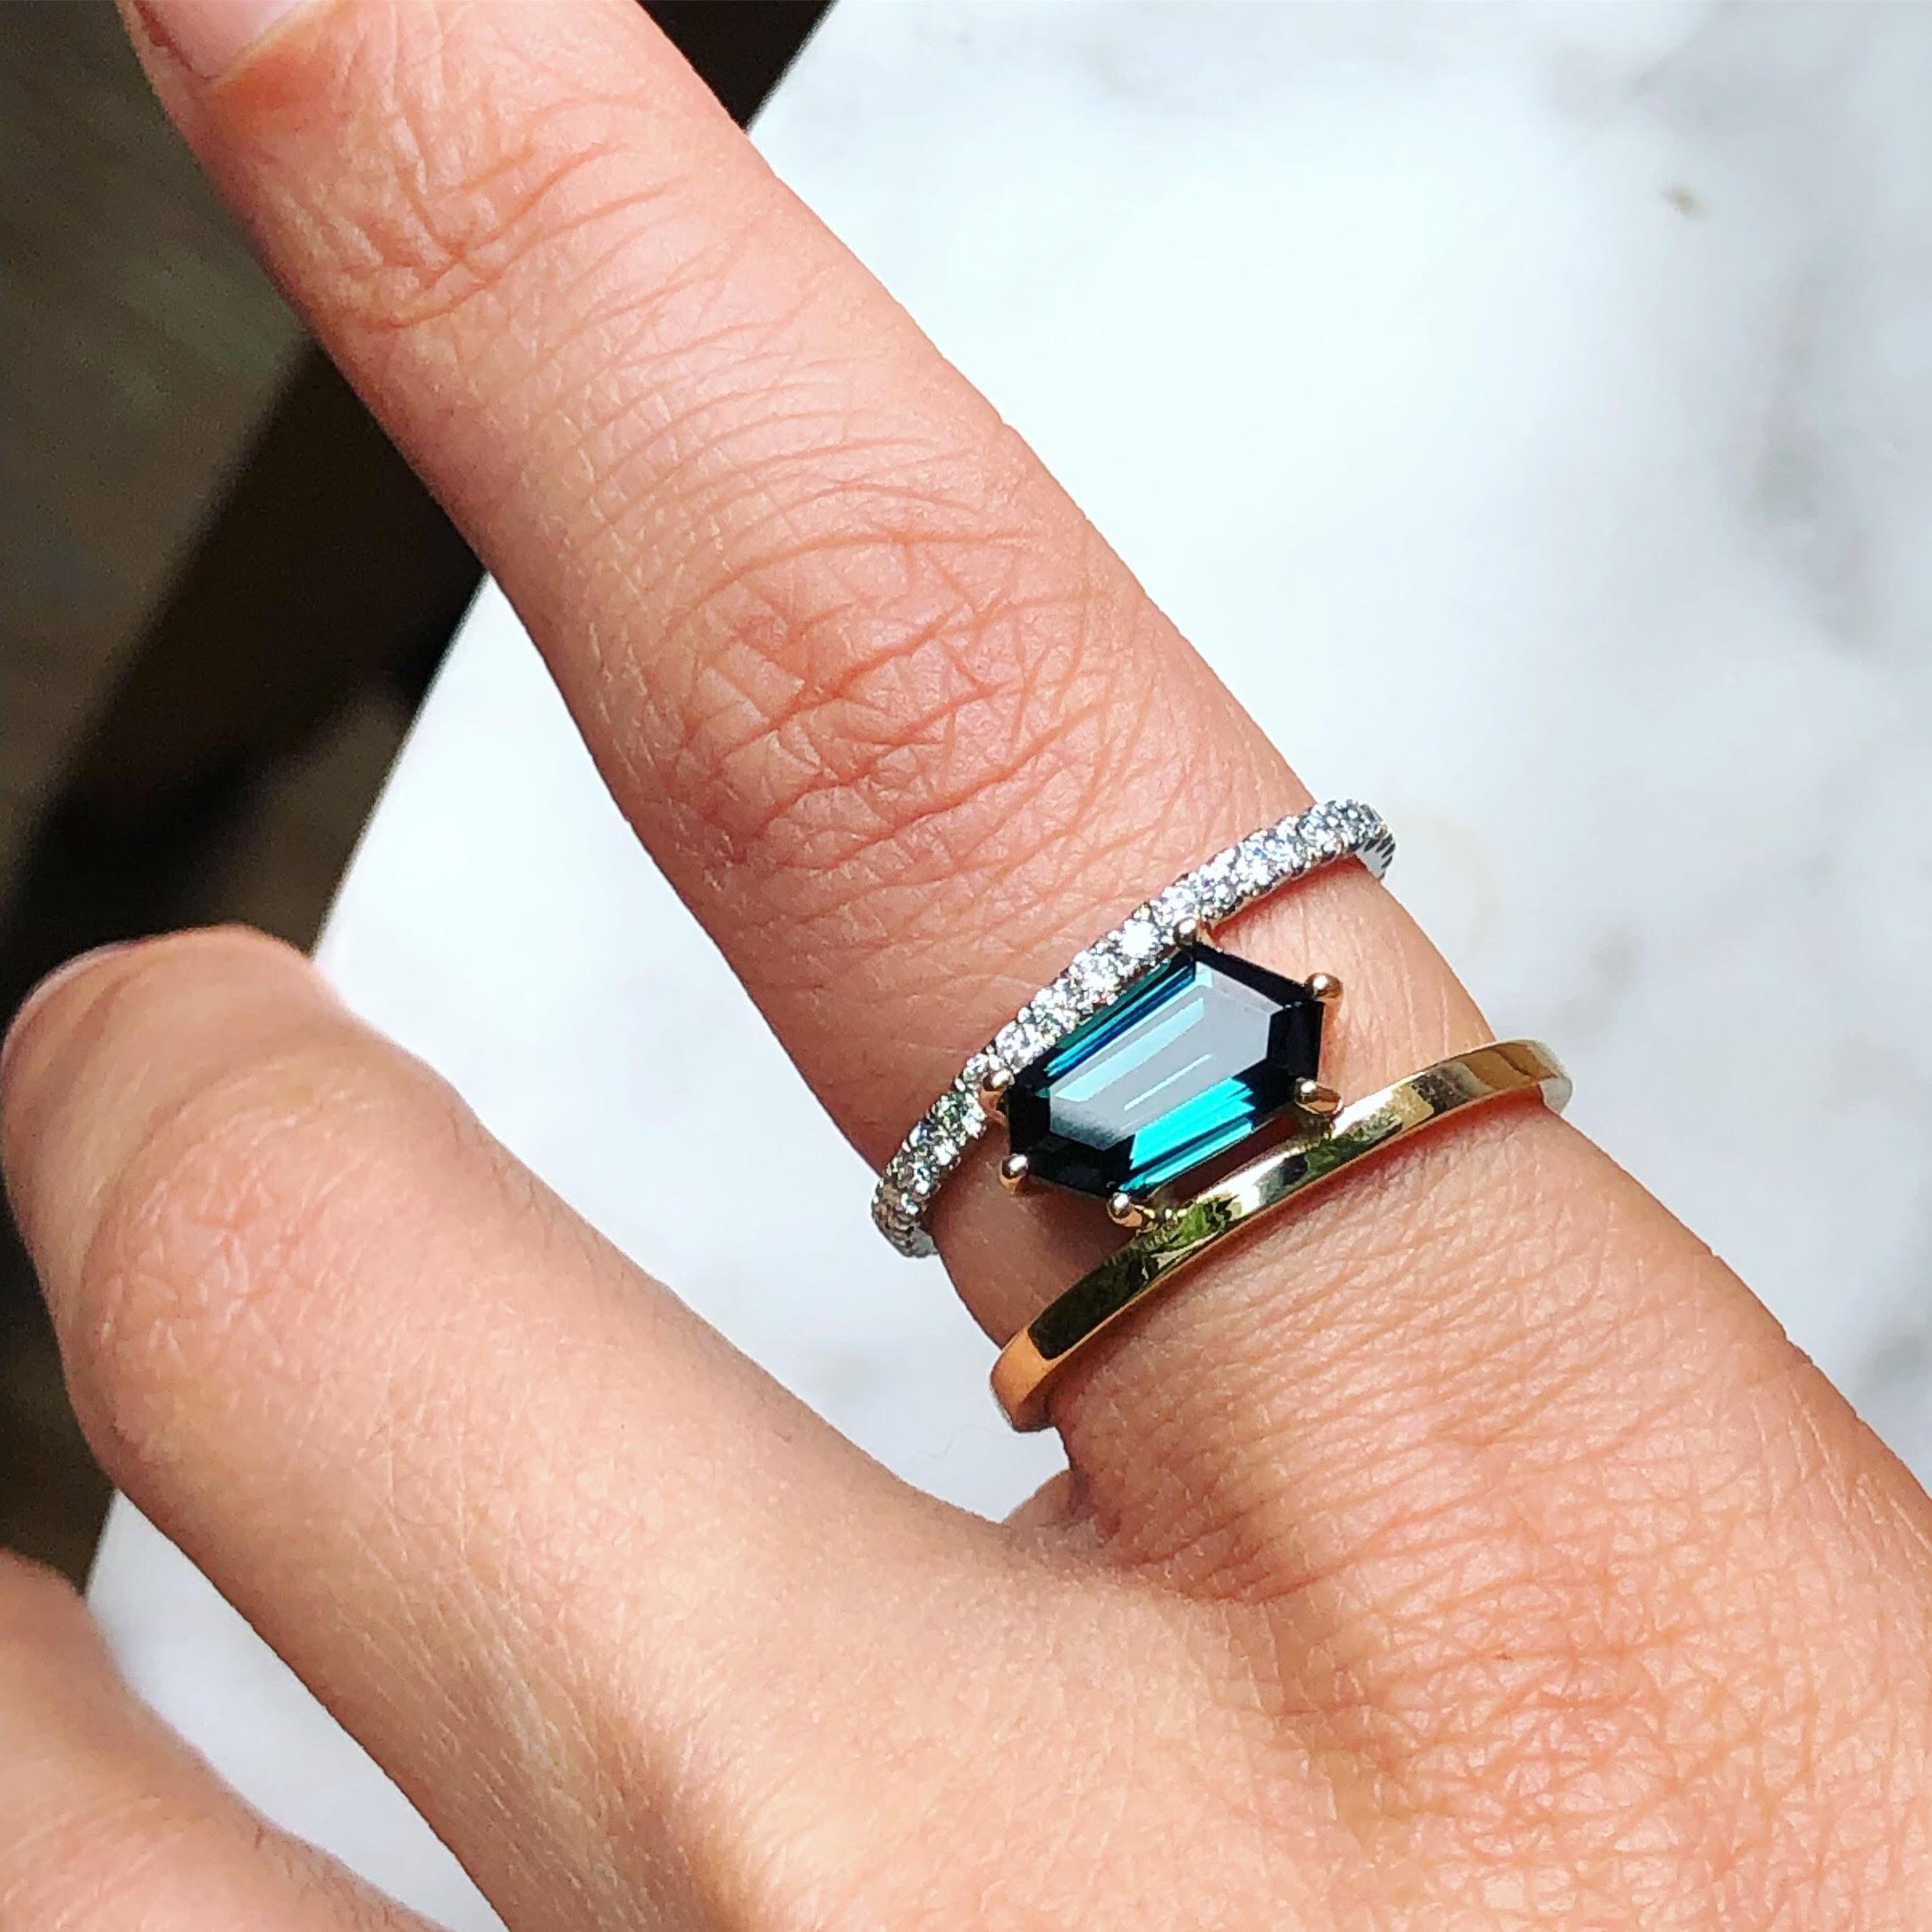 SELIN KENT's stunning Petra Tourmaline Ring features a custom-cut hexagonal blue tourmaline, flanked on two sides by two gold bands that connect in the back for a comfortable fit. 

- Tourmaline is approximately 2 carats and white diamonds are 0.40